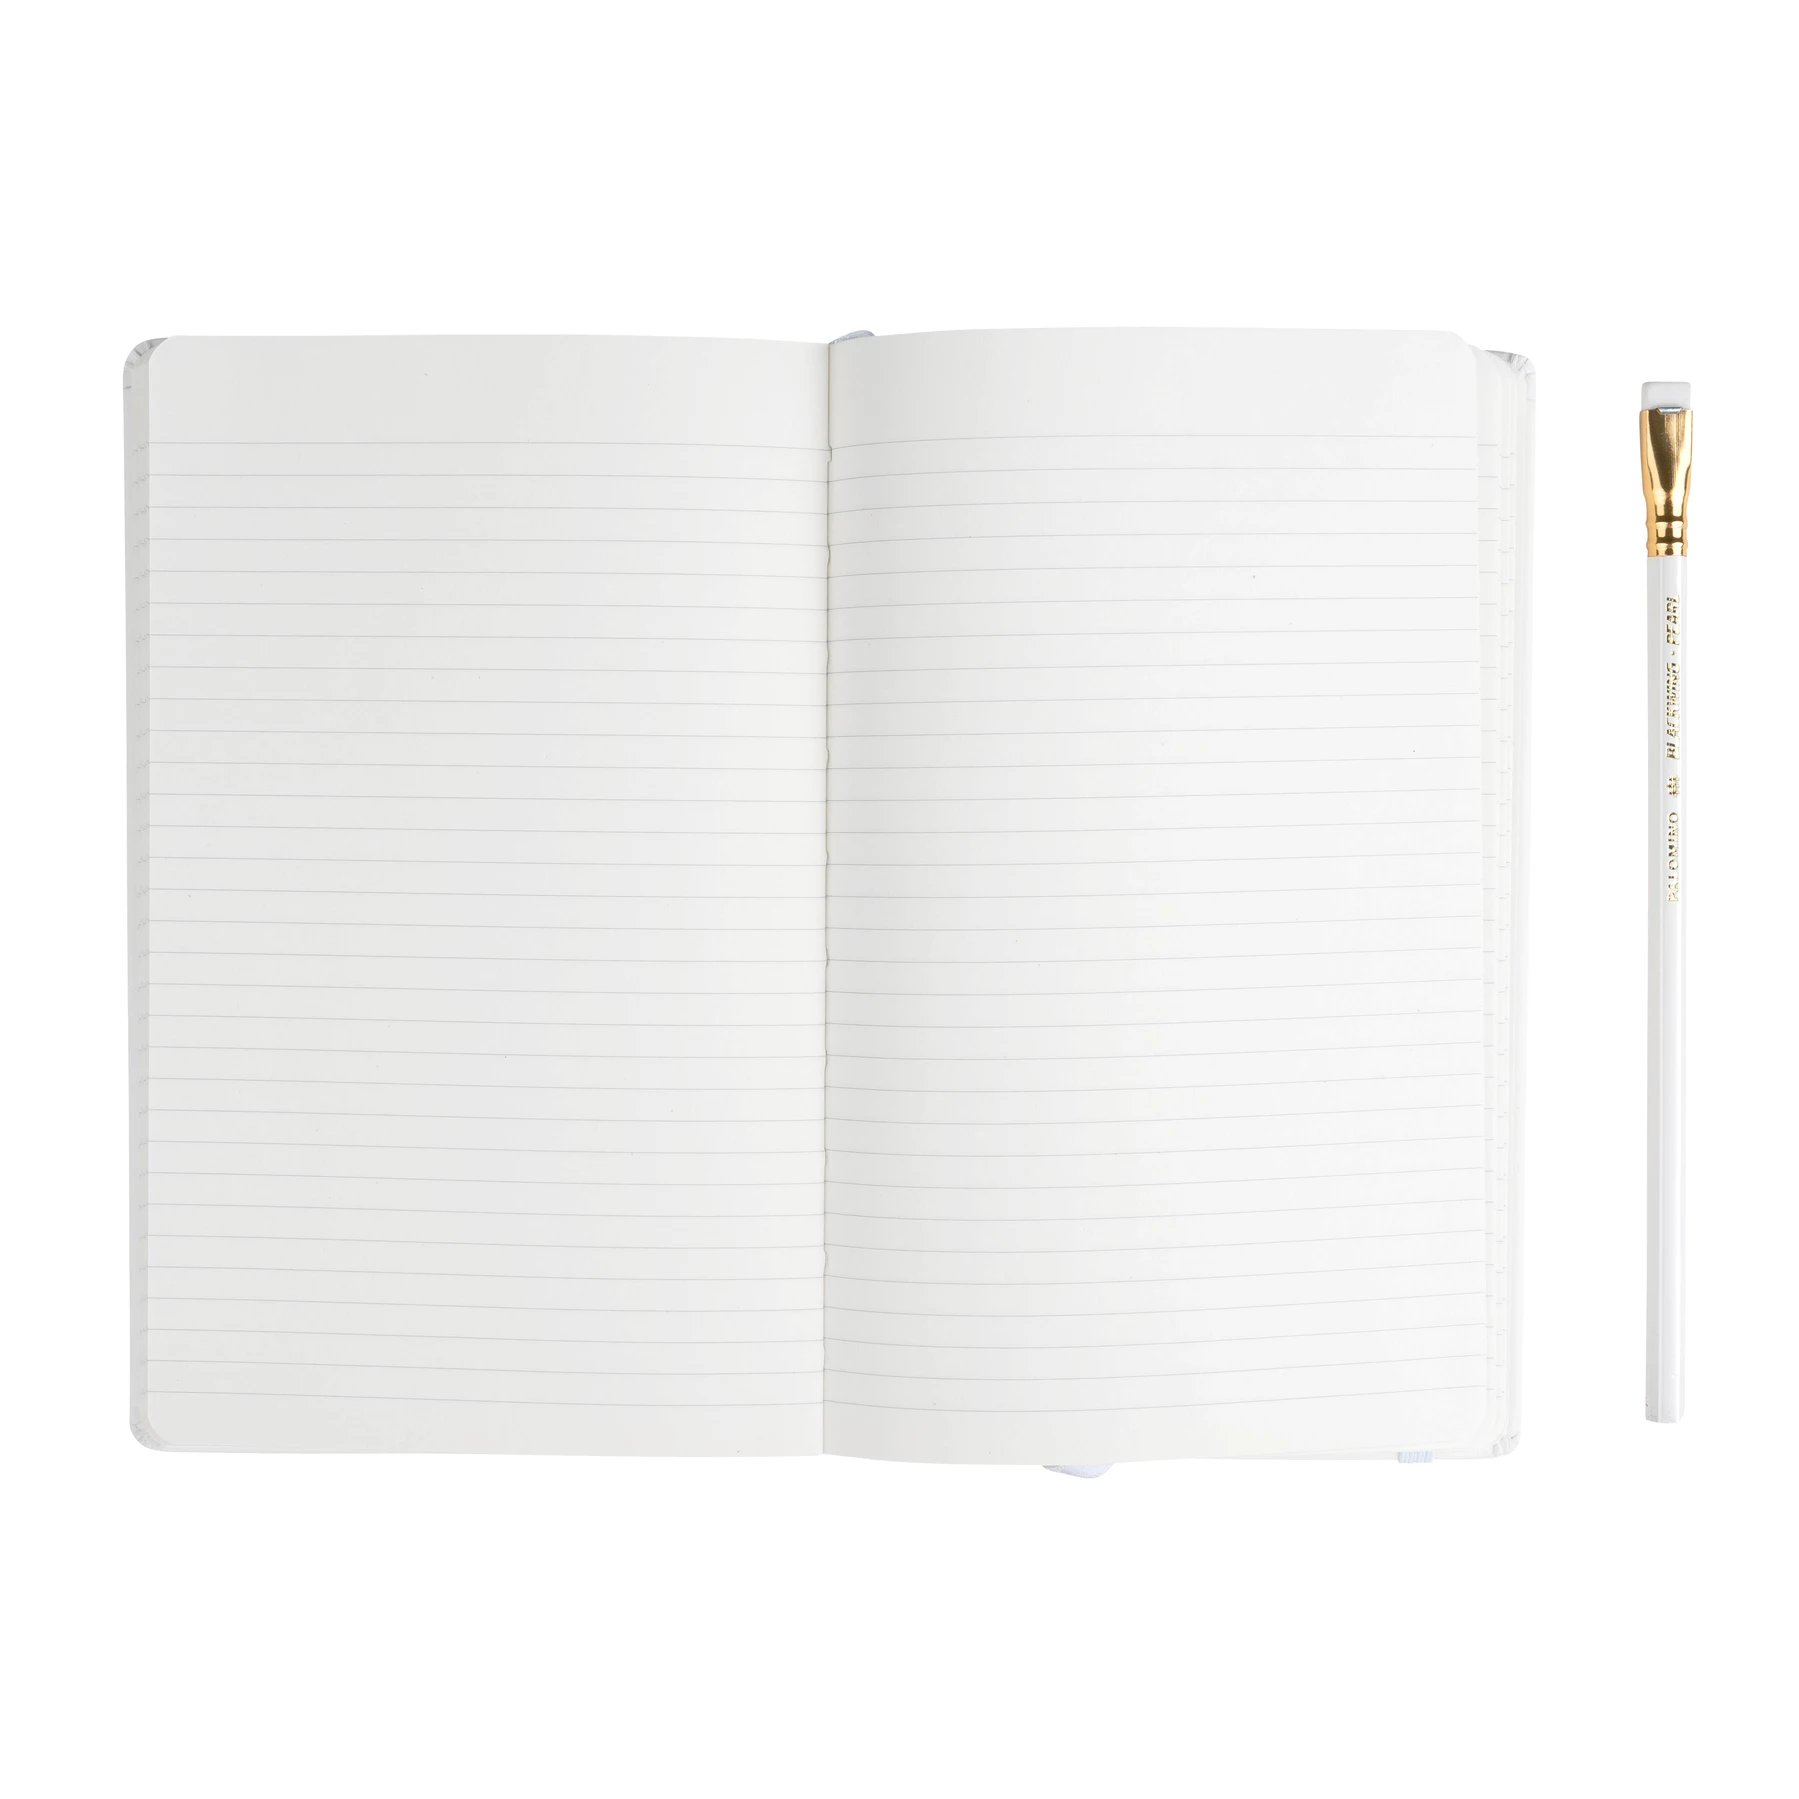 Blackwing Slate A5 Notebook + Pencil [White]